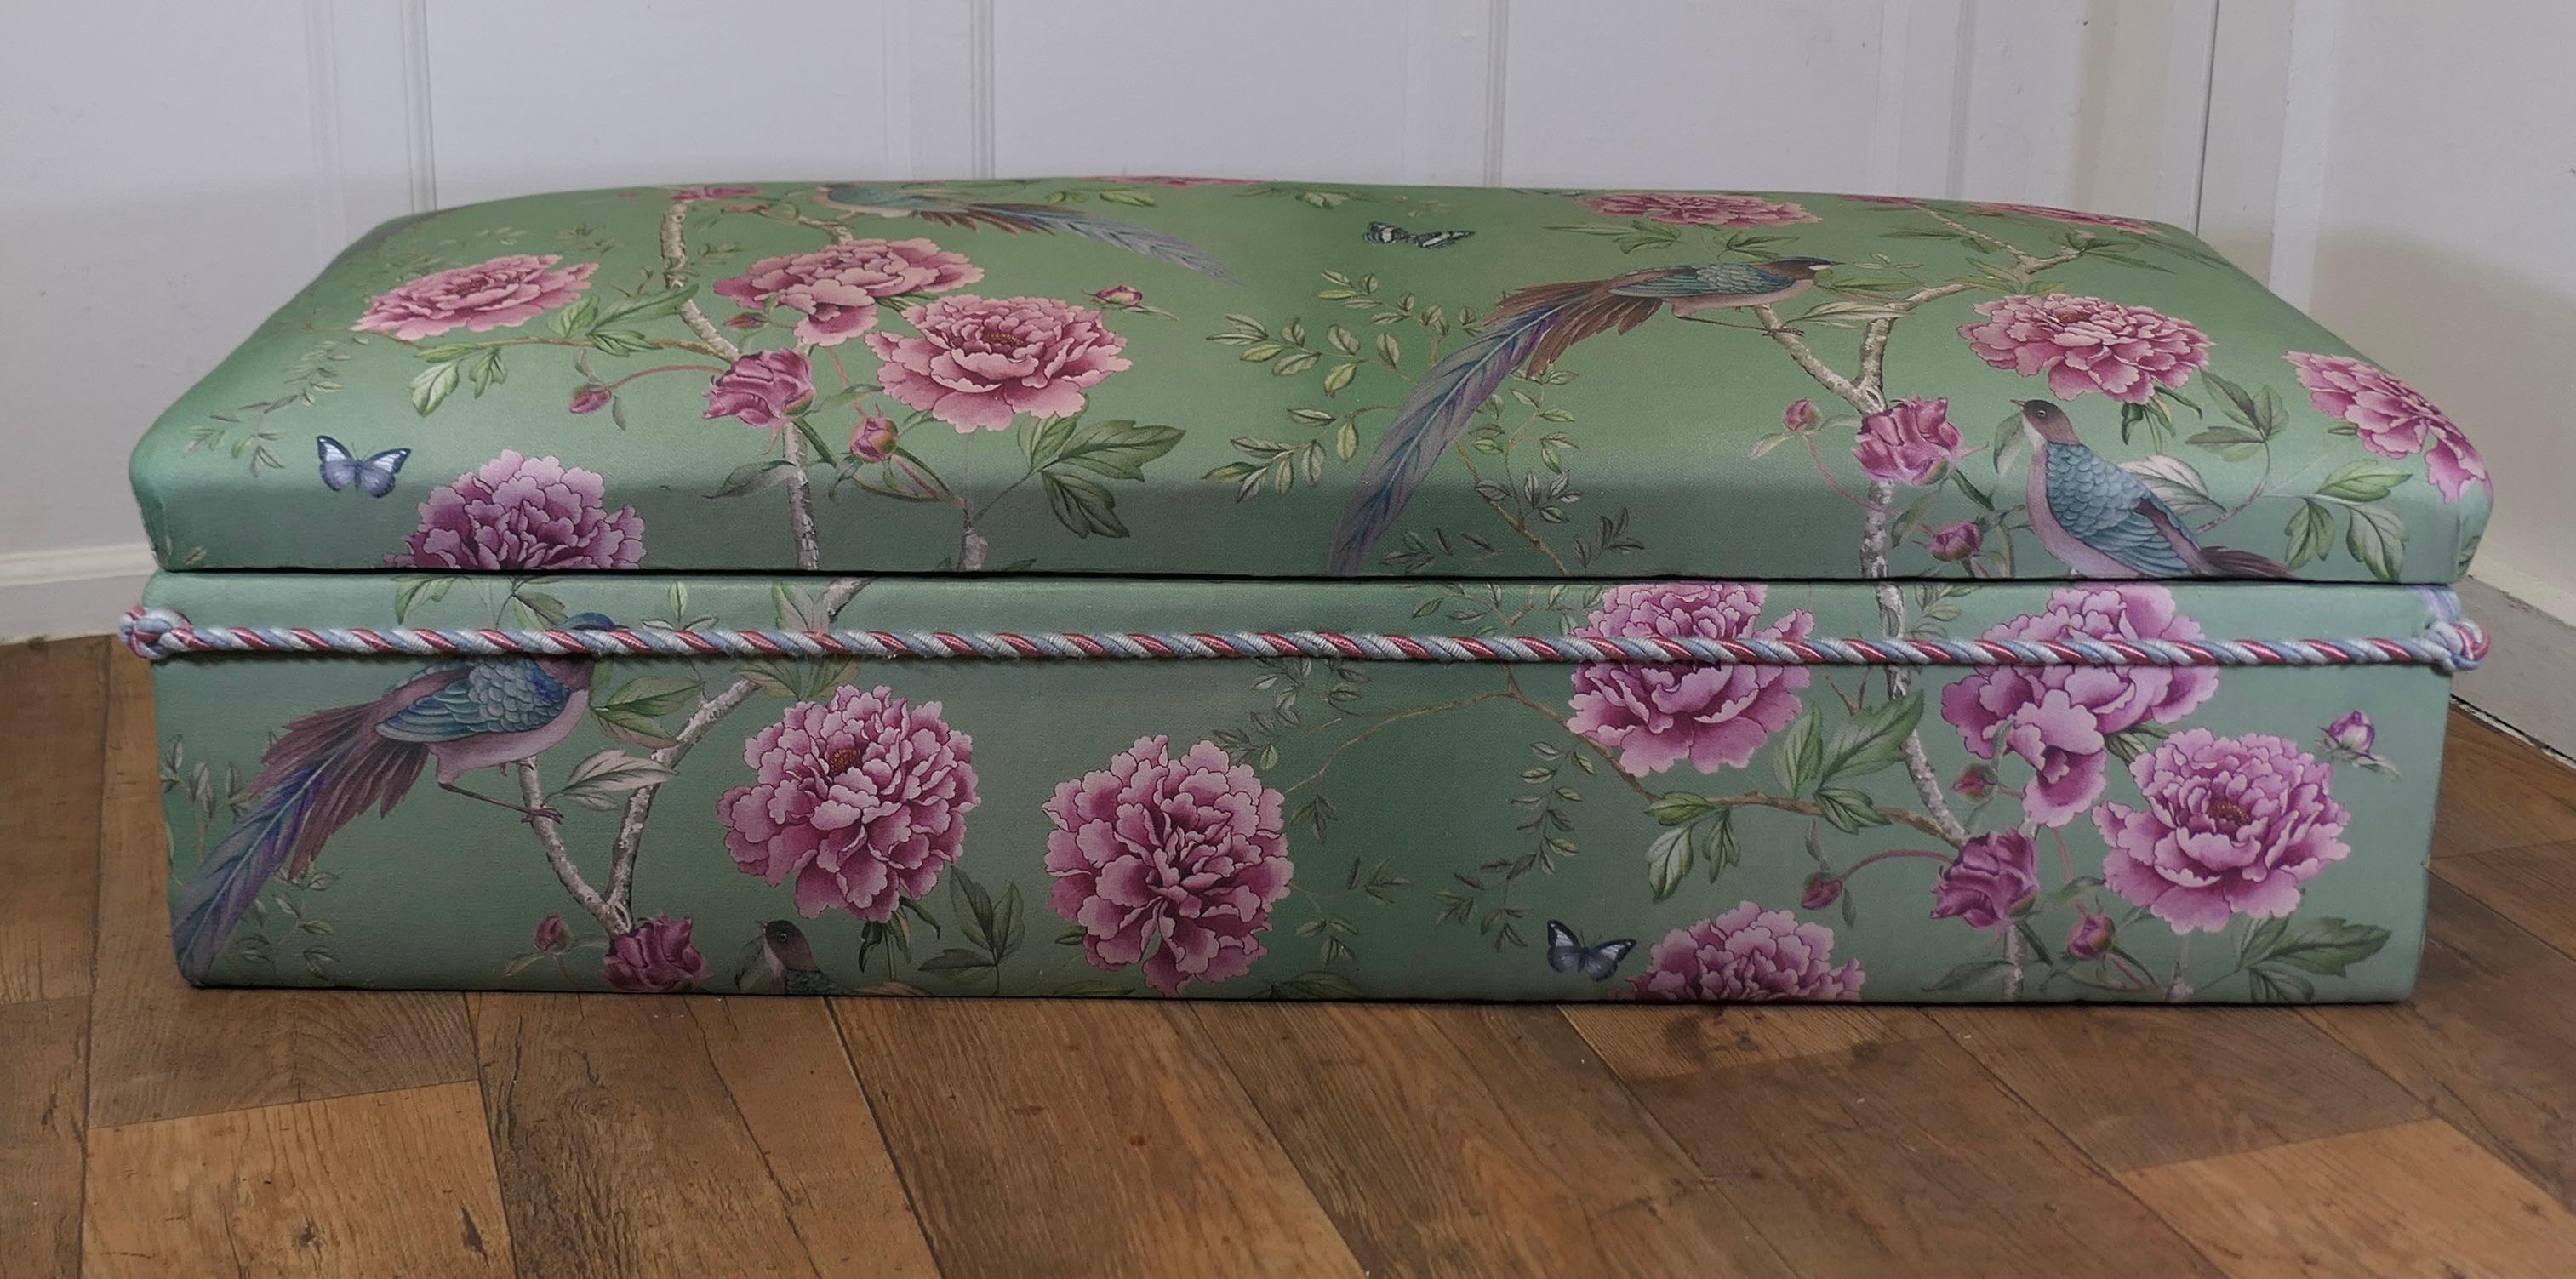 A Large Upholstered Ottoman or Window Seat 

This piece is upholstered with a beautiful chinoiserie designed linen fabric, it has a green background and is decorated with giant pink chrysanthemums and birds of paradise
The ottoman has been designed